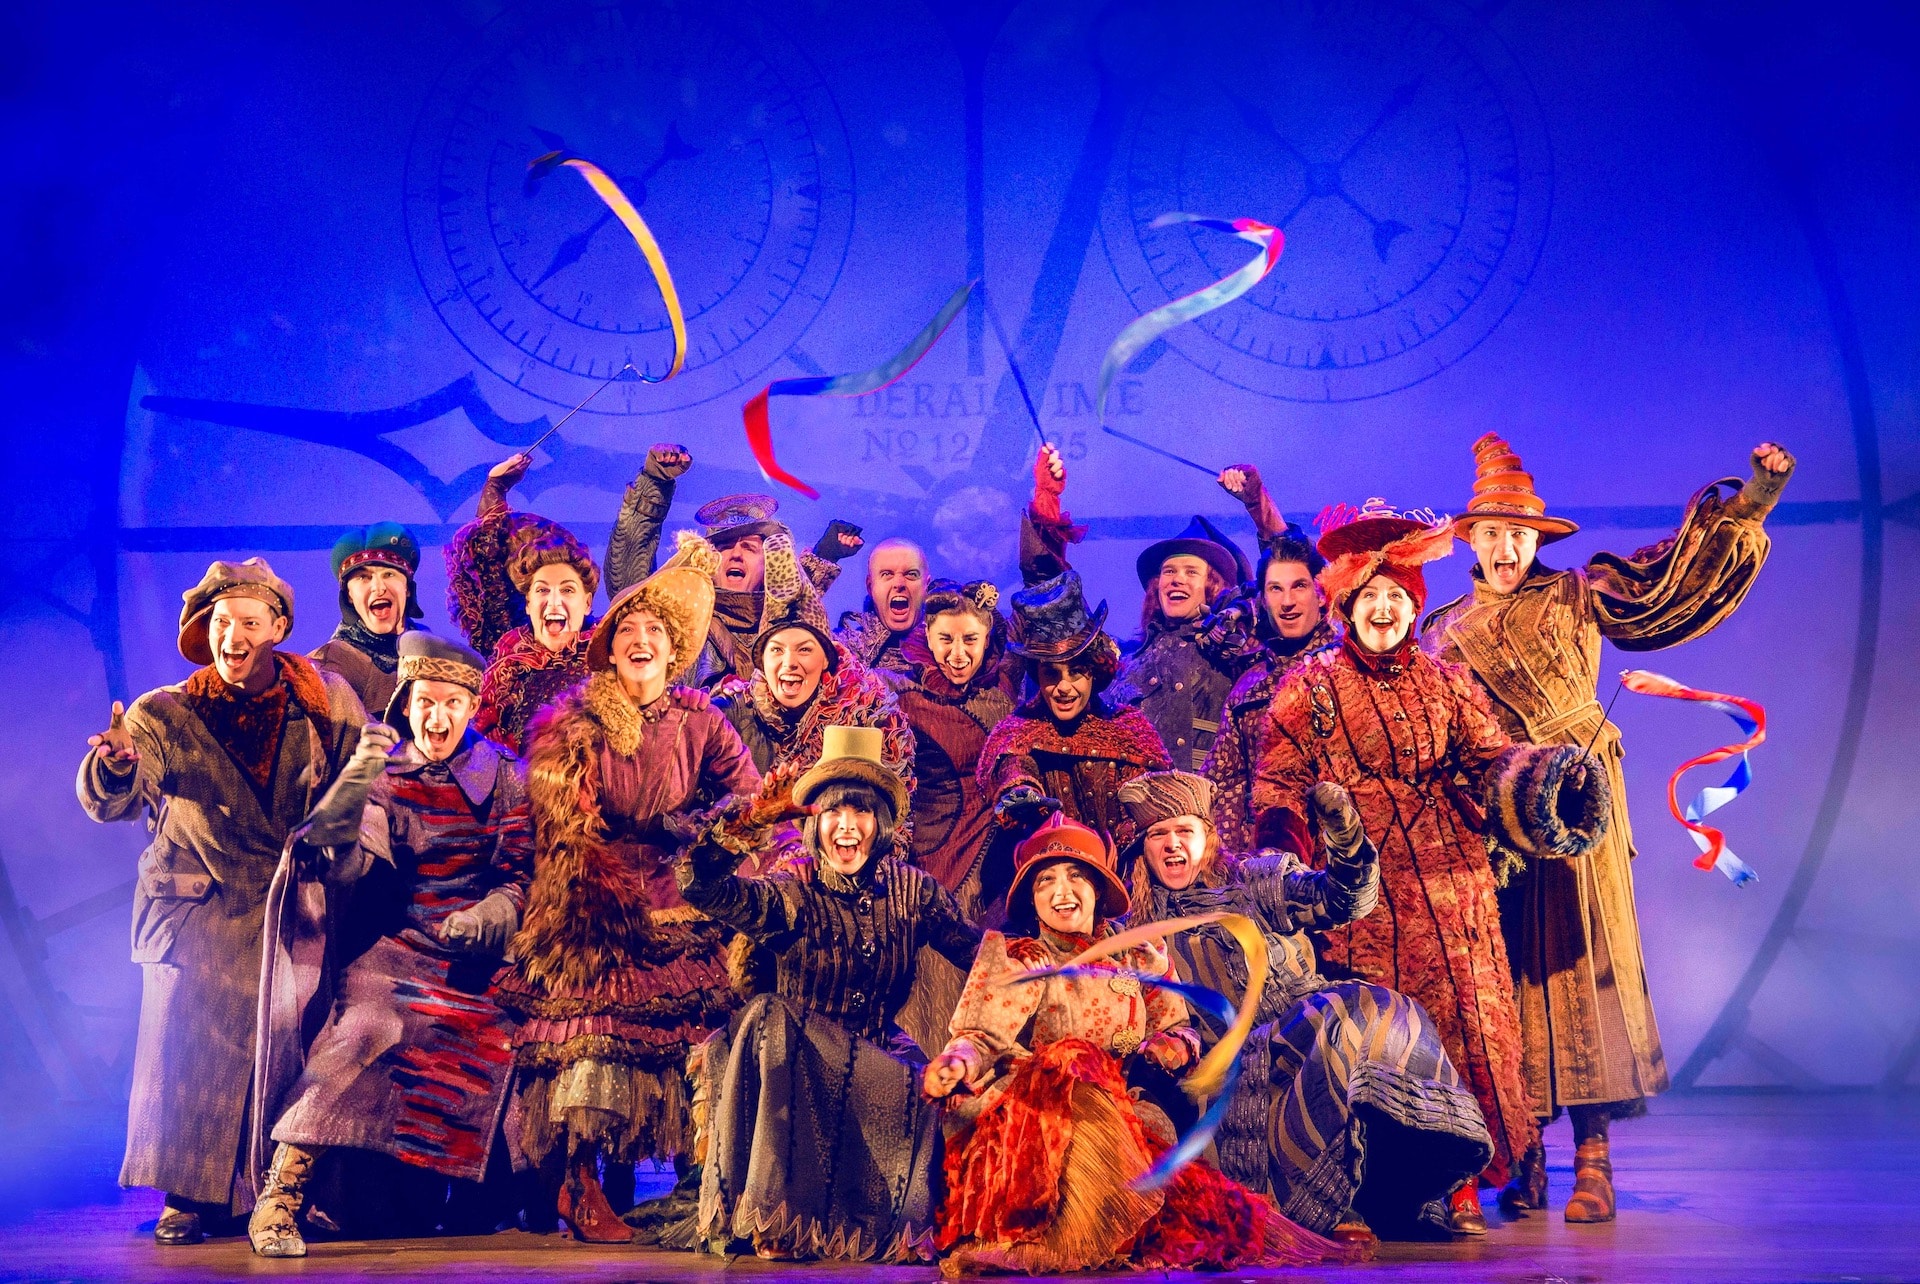 A Wicked London production image showing a group of Ozians waving ribbons and smiling on stage